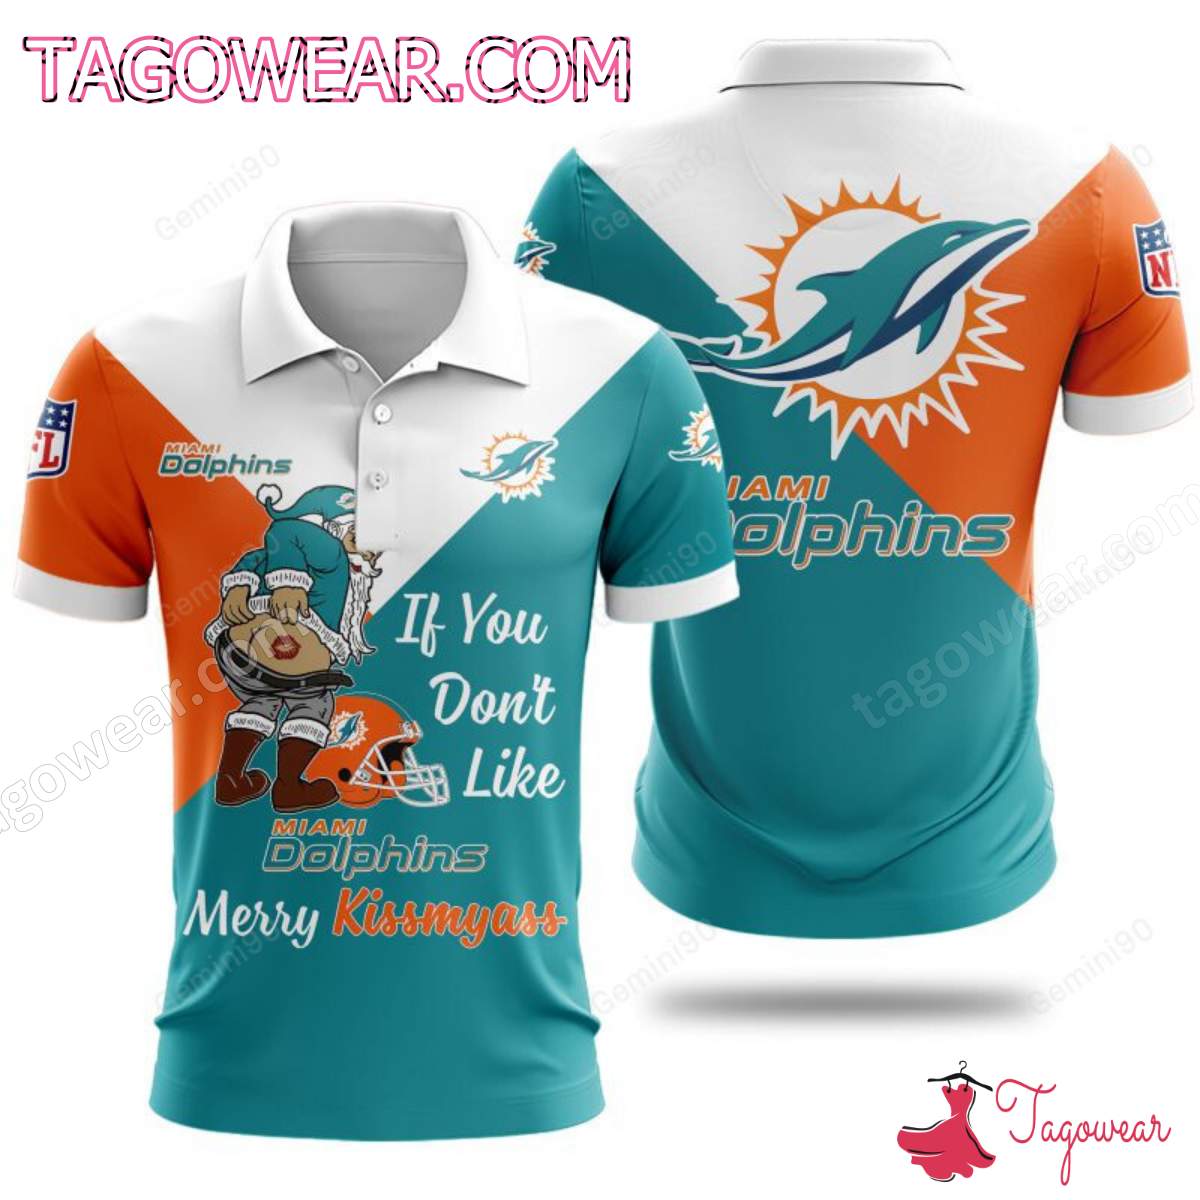 If You Don't Like Miami Dolphins Merry Kissmyass T-shirt, Polo, Hoodie